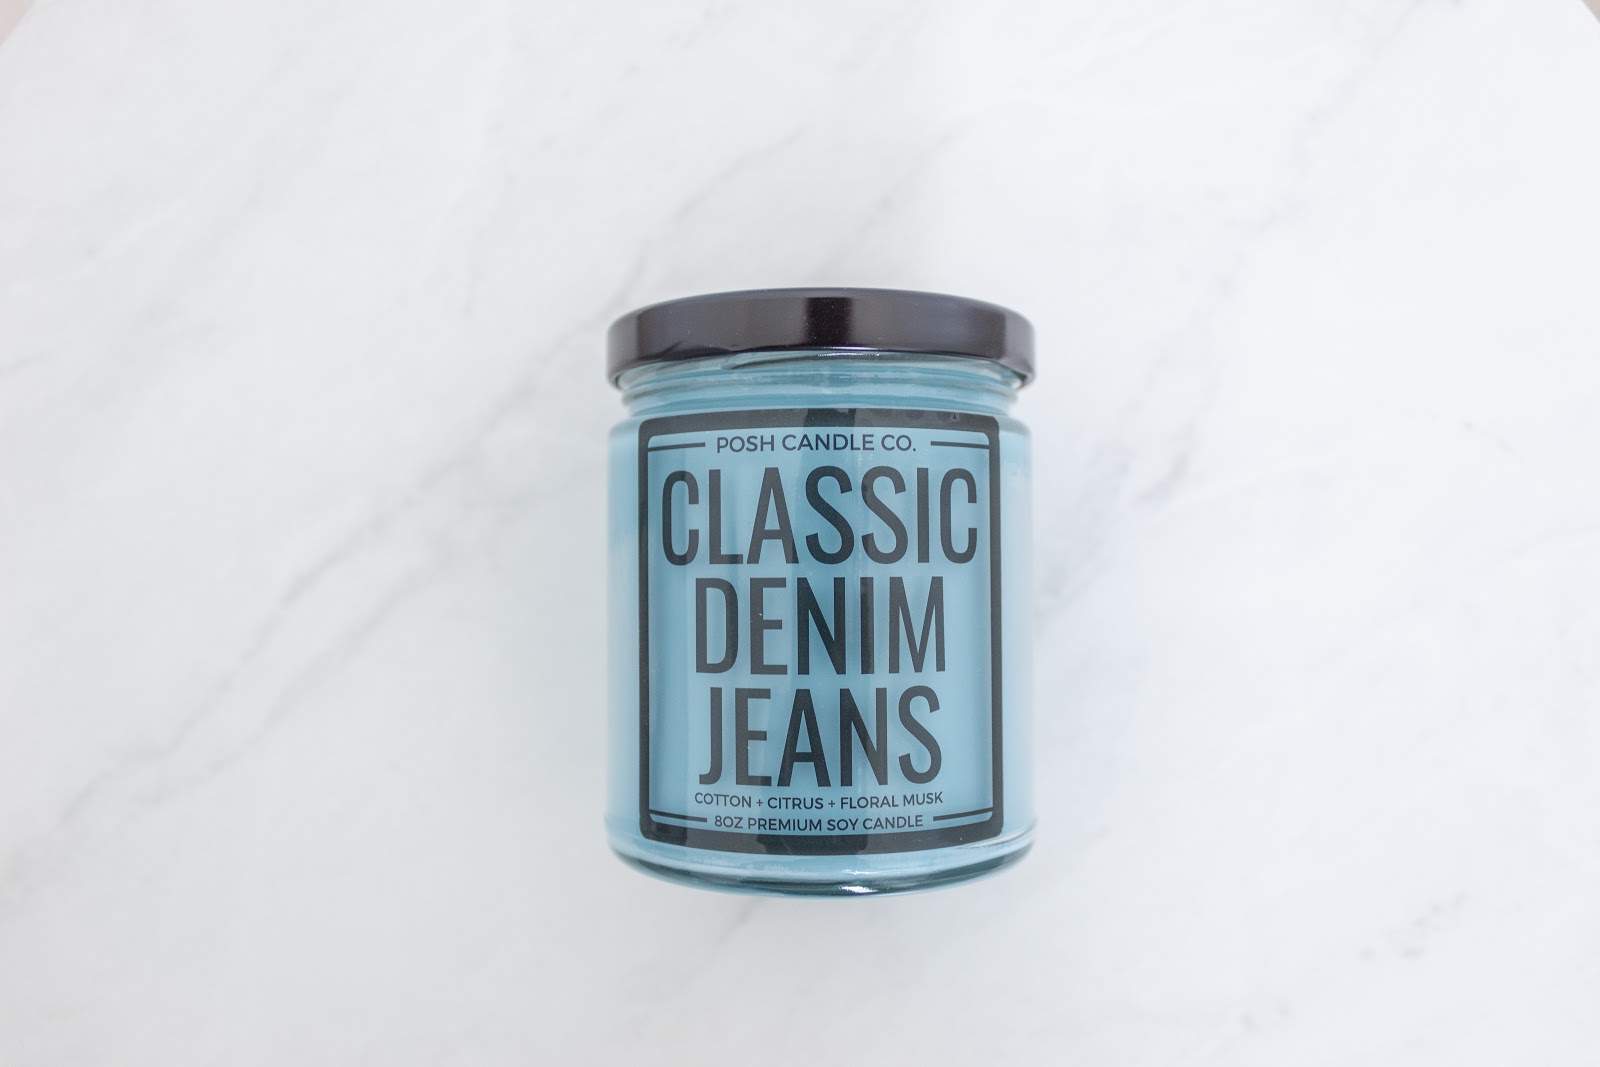 Posh Candle Co. Classic Denim Jeans
Patience & Pearls